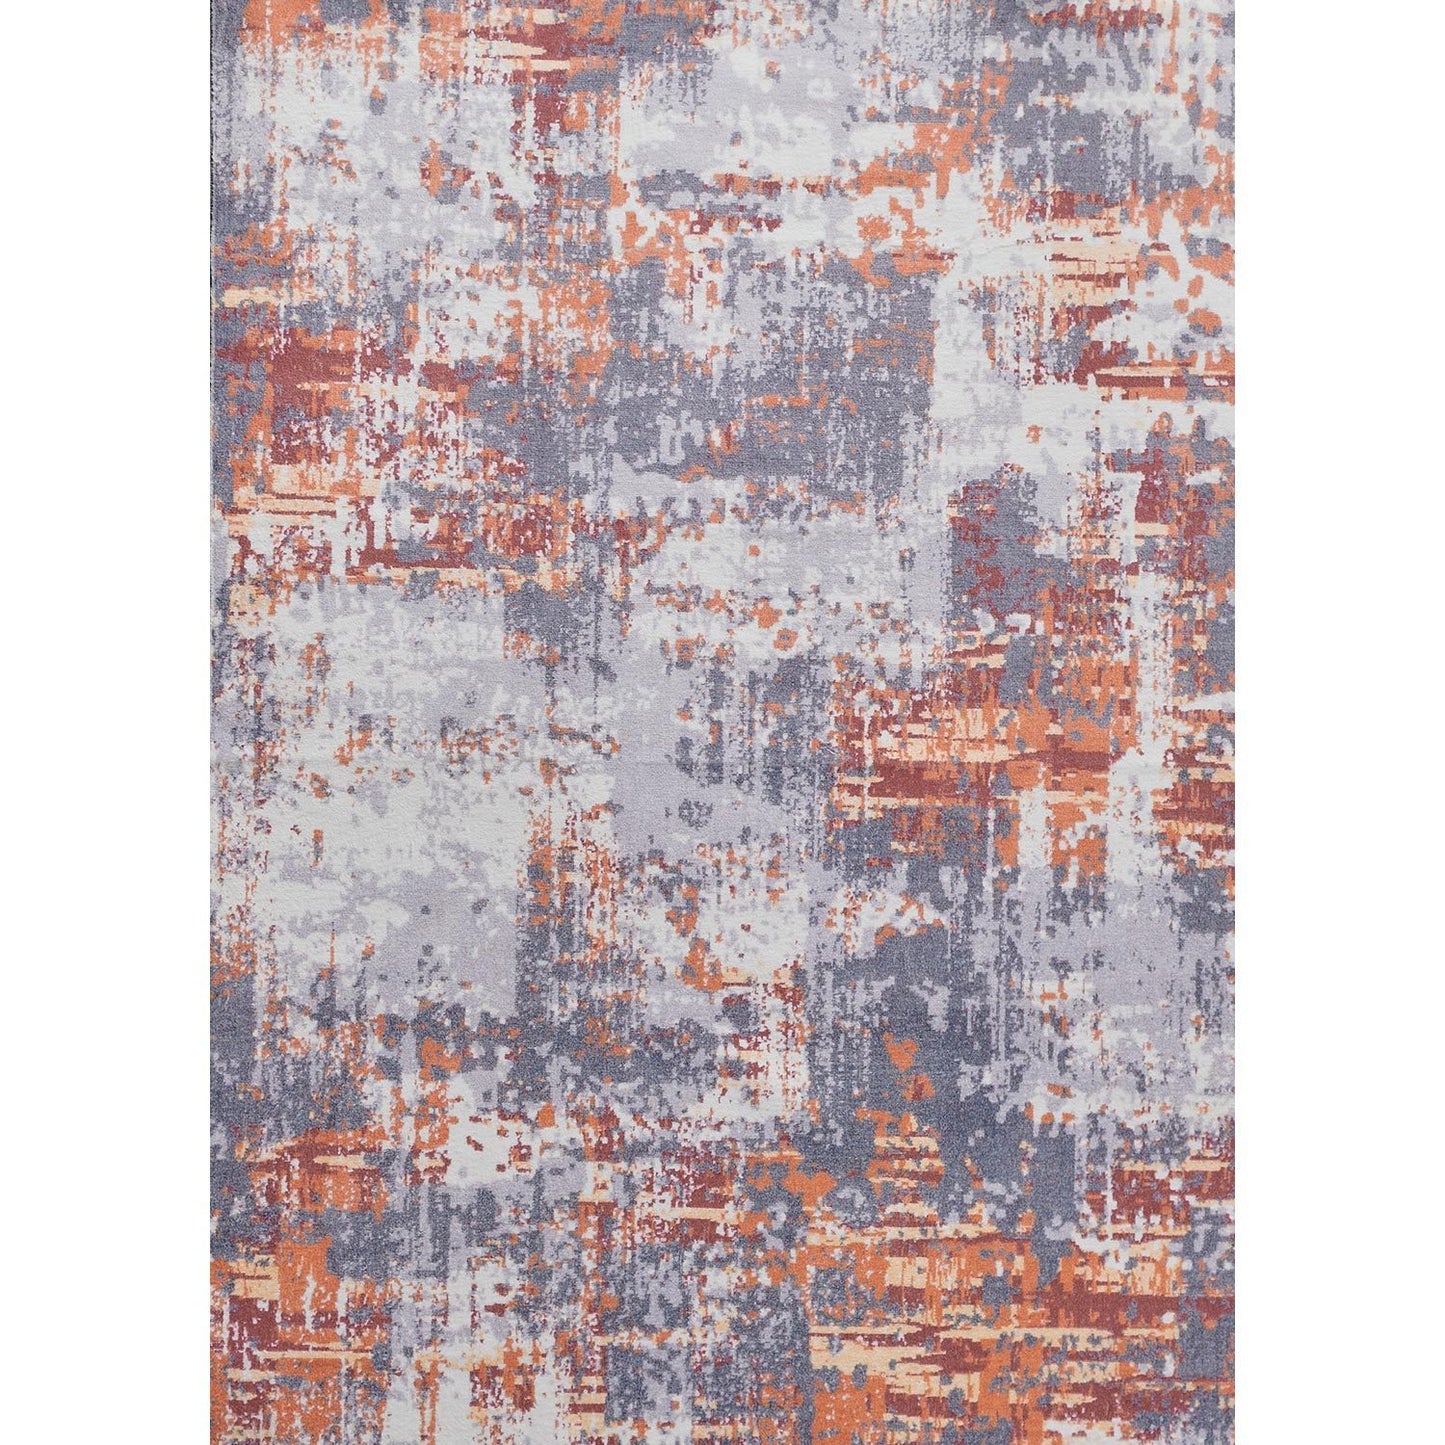 Zara Abstract Grey Brown and Rust Area Rug 9X6